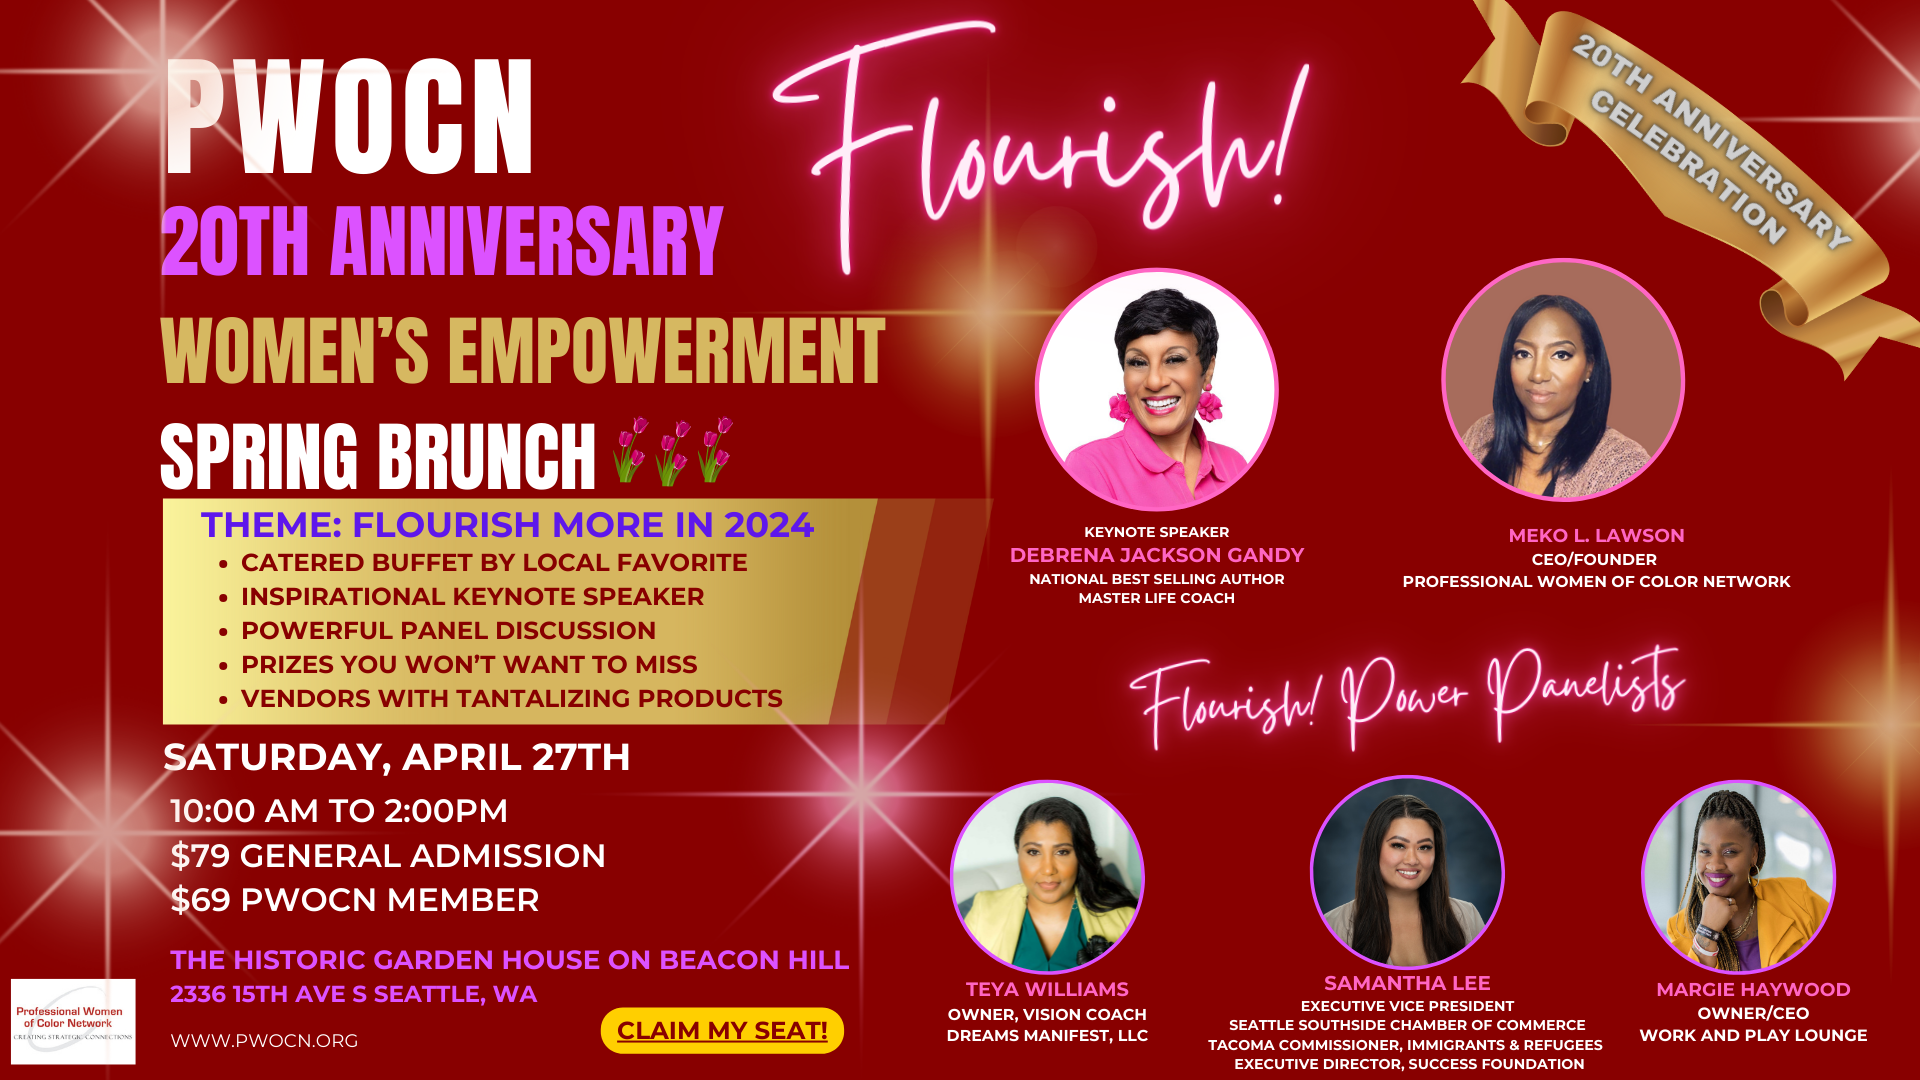 National Professional Women of Color Network - Events